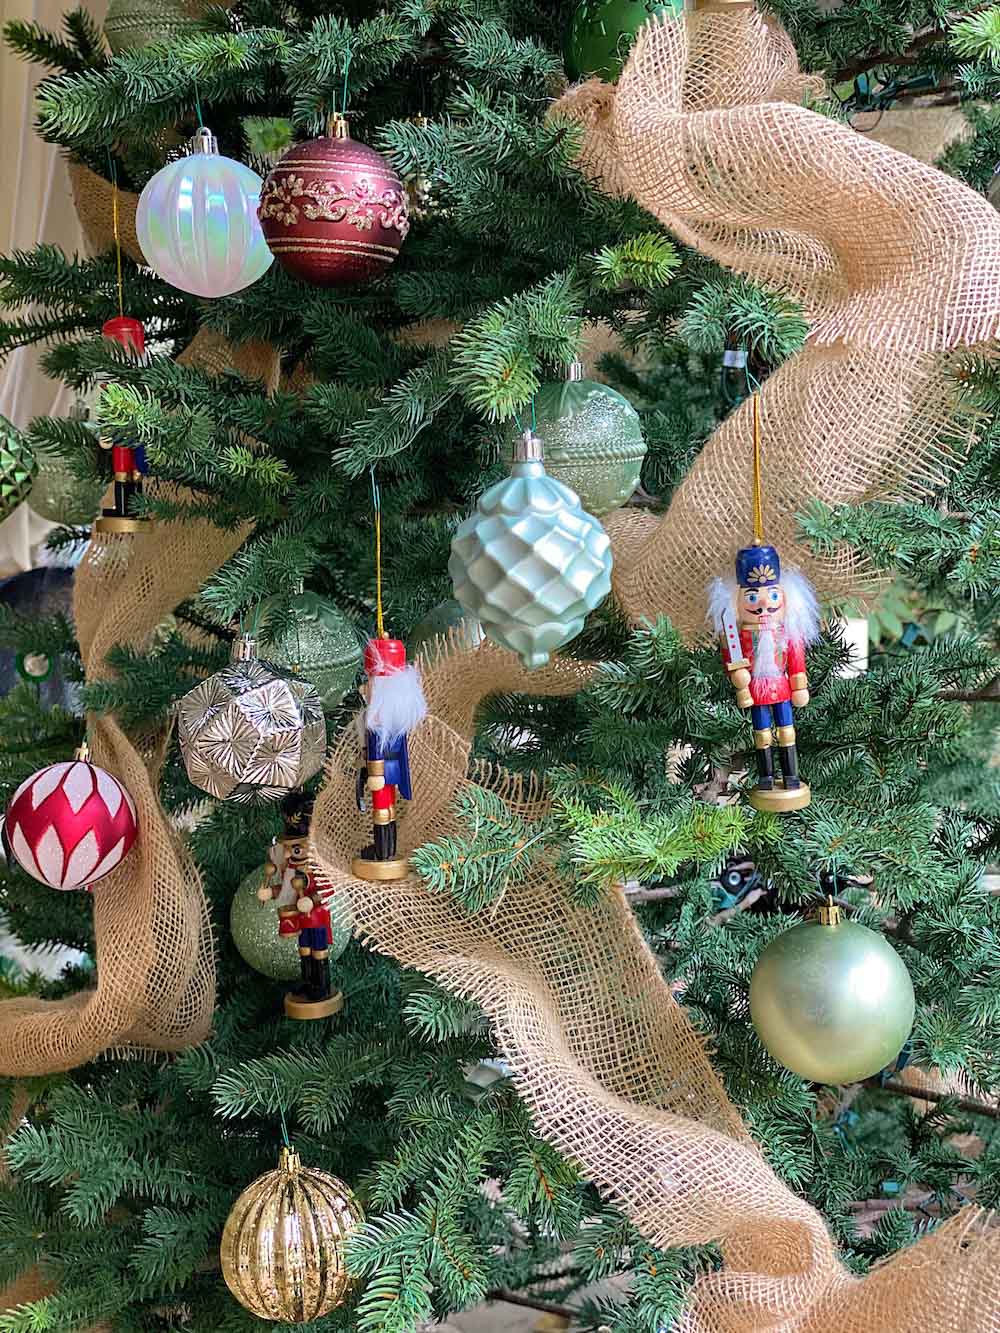 Close up shot of tree with ornaments